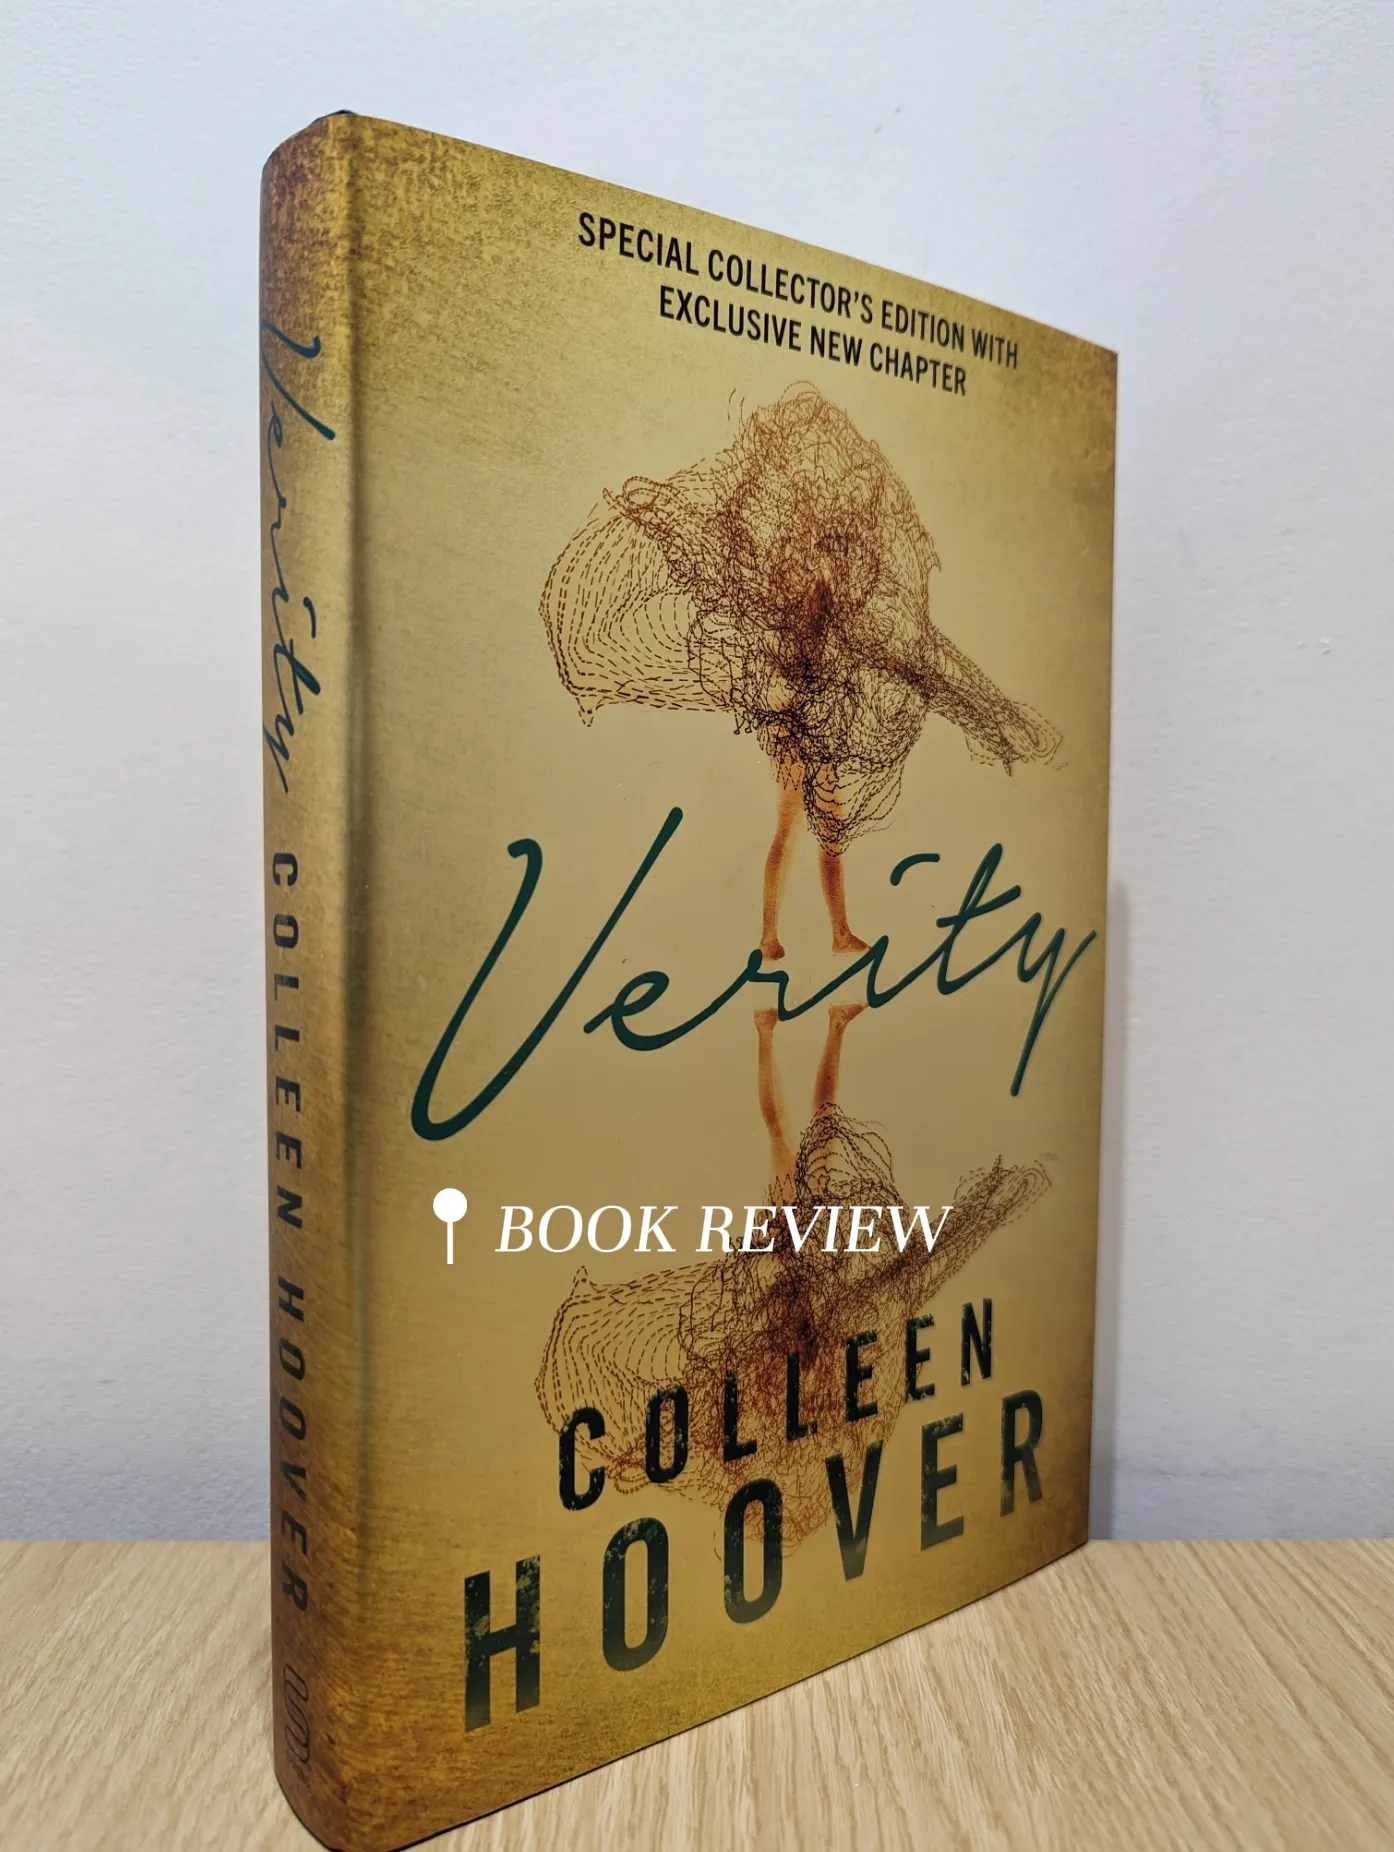 Colleen Hoover's Book, Verity Is a Thrilling and Spicey Read